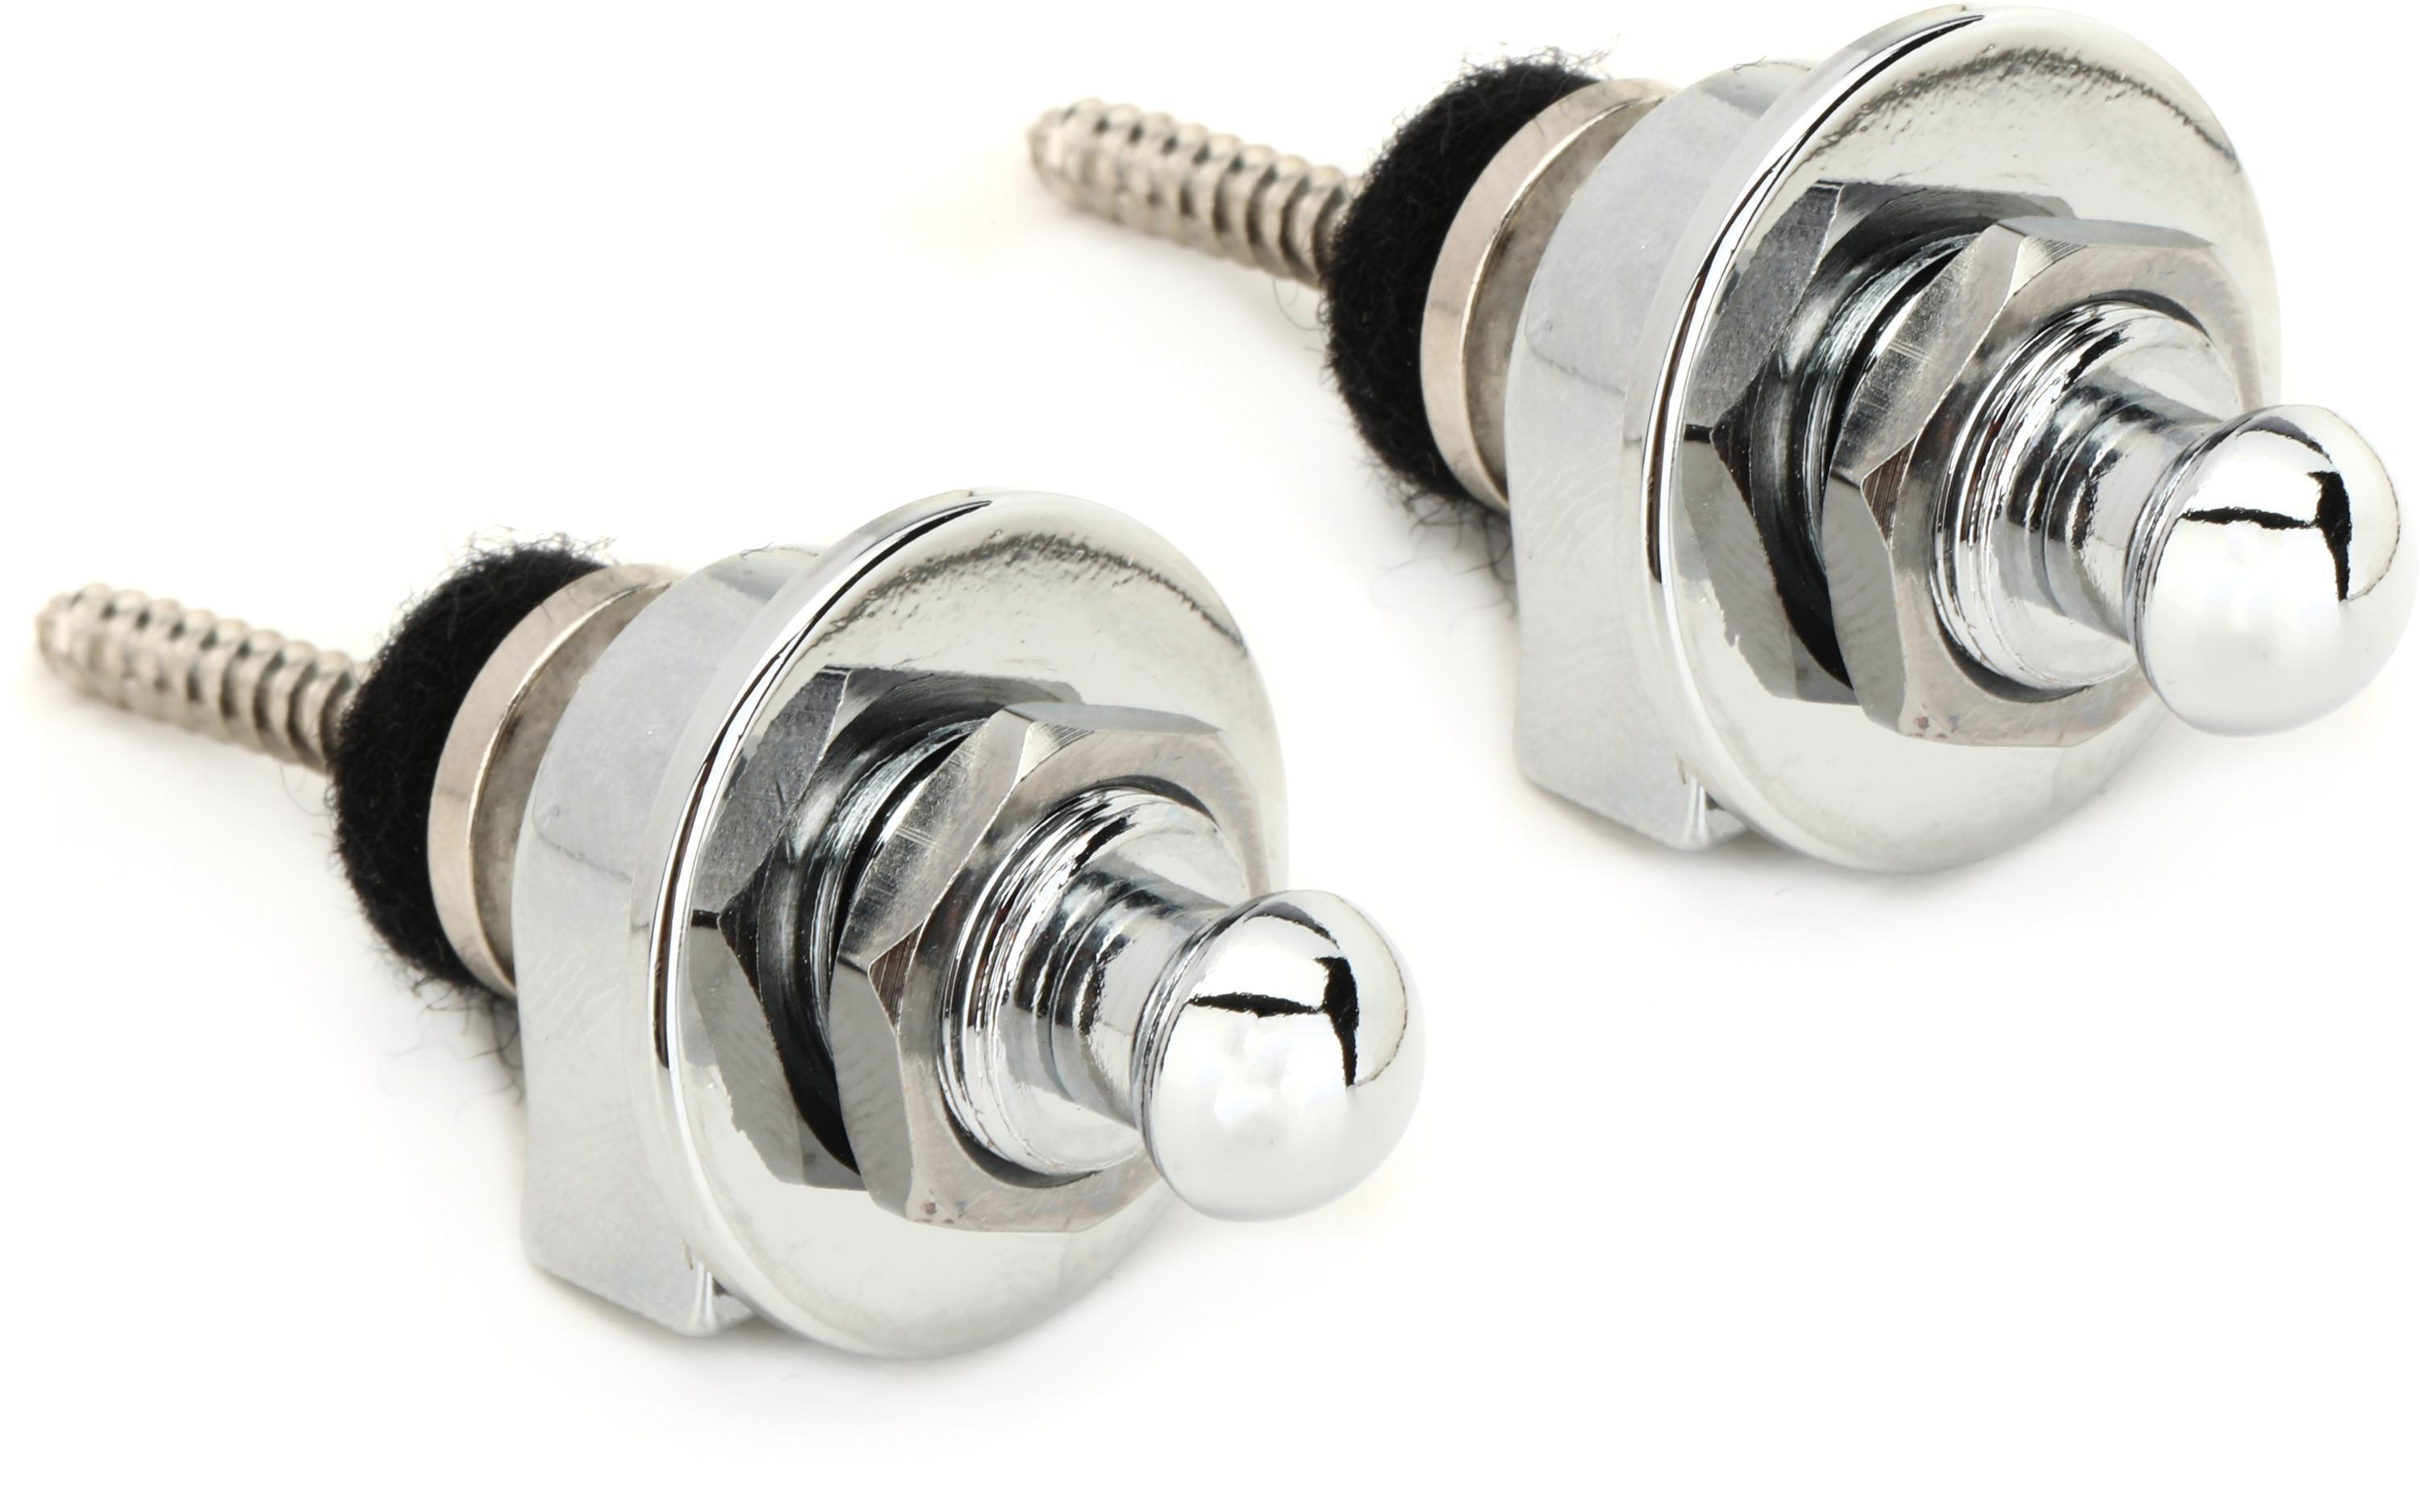 REVIEW] Guitar Thrones Spiked Strap Locks